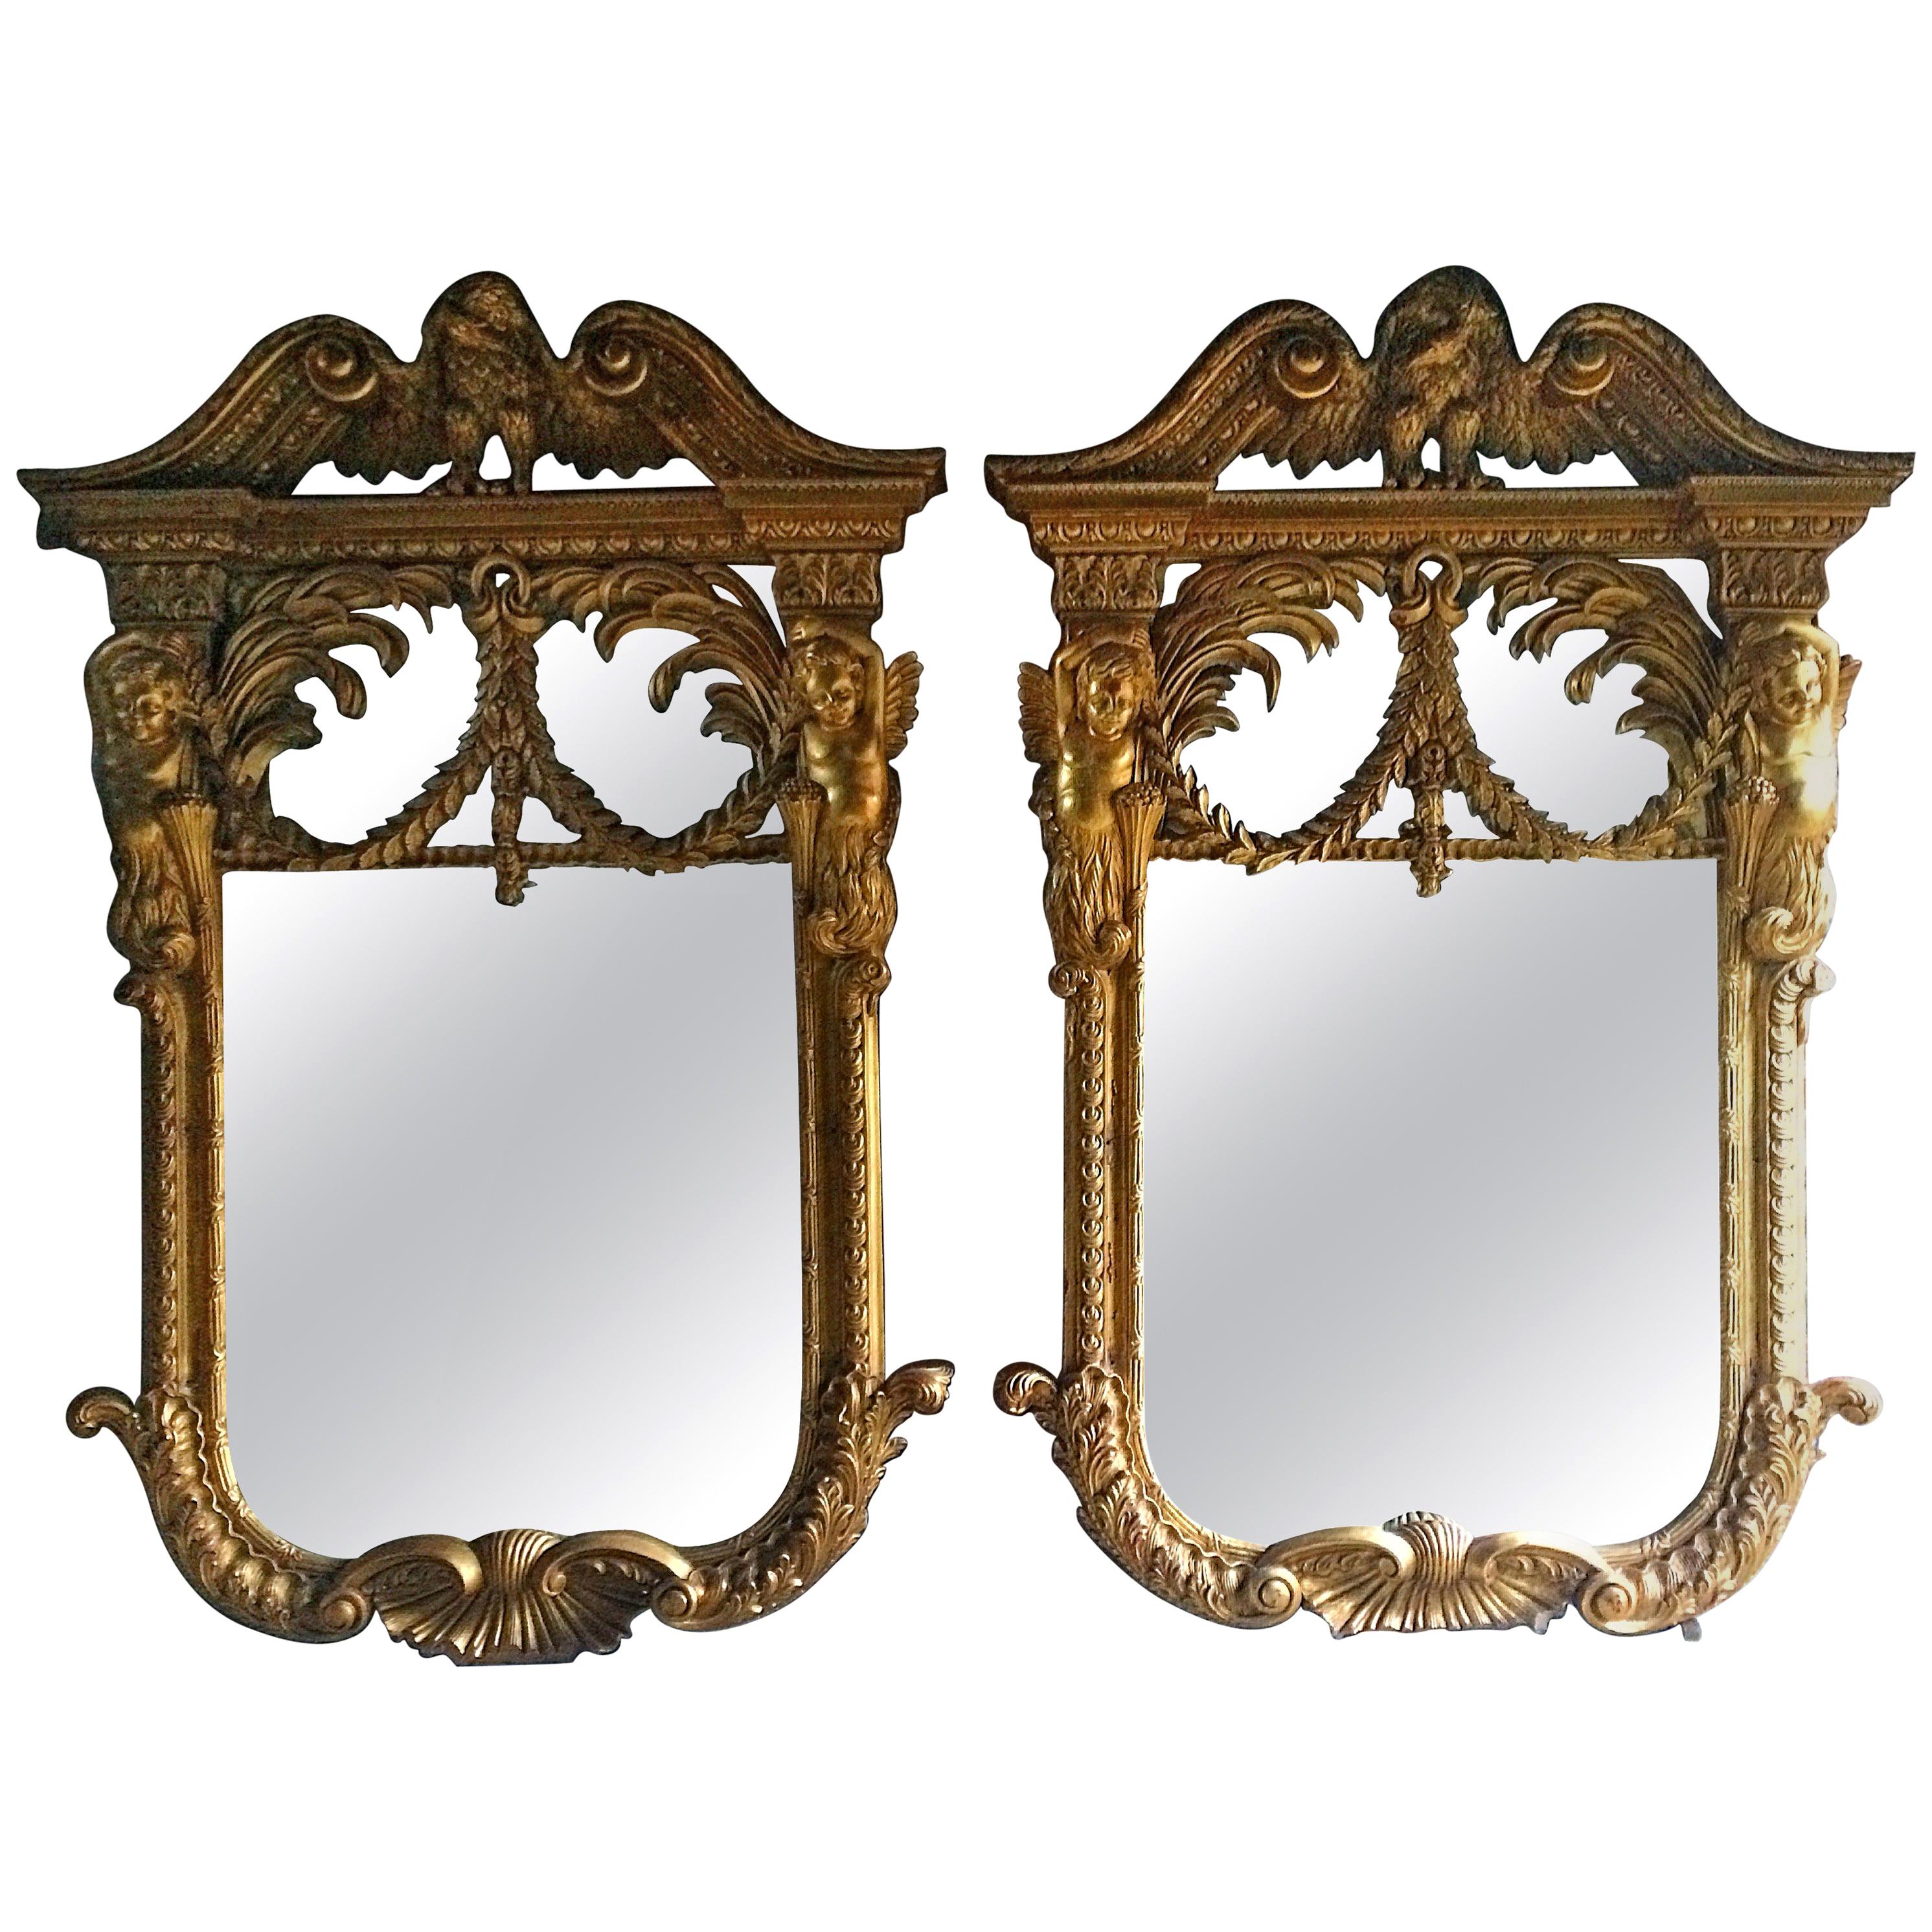 French Wall Mirrors Giltwood Antique William Kent Style Rococo